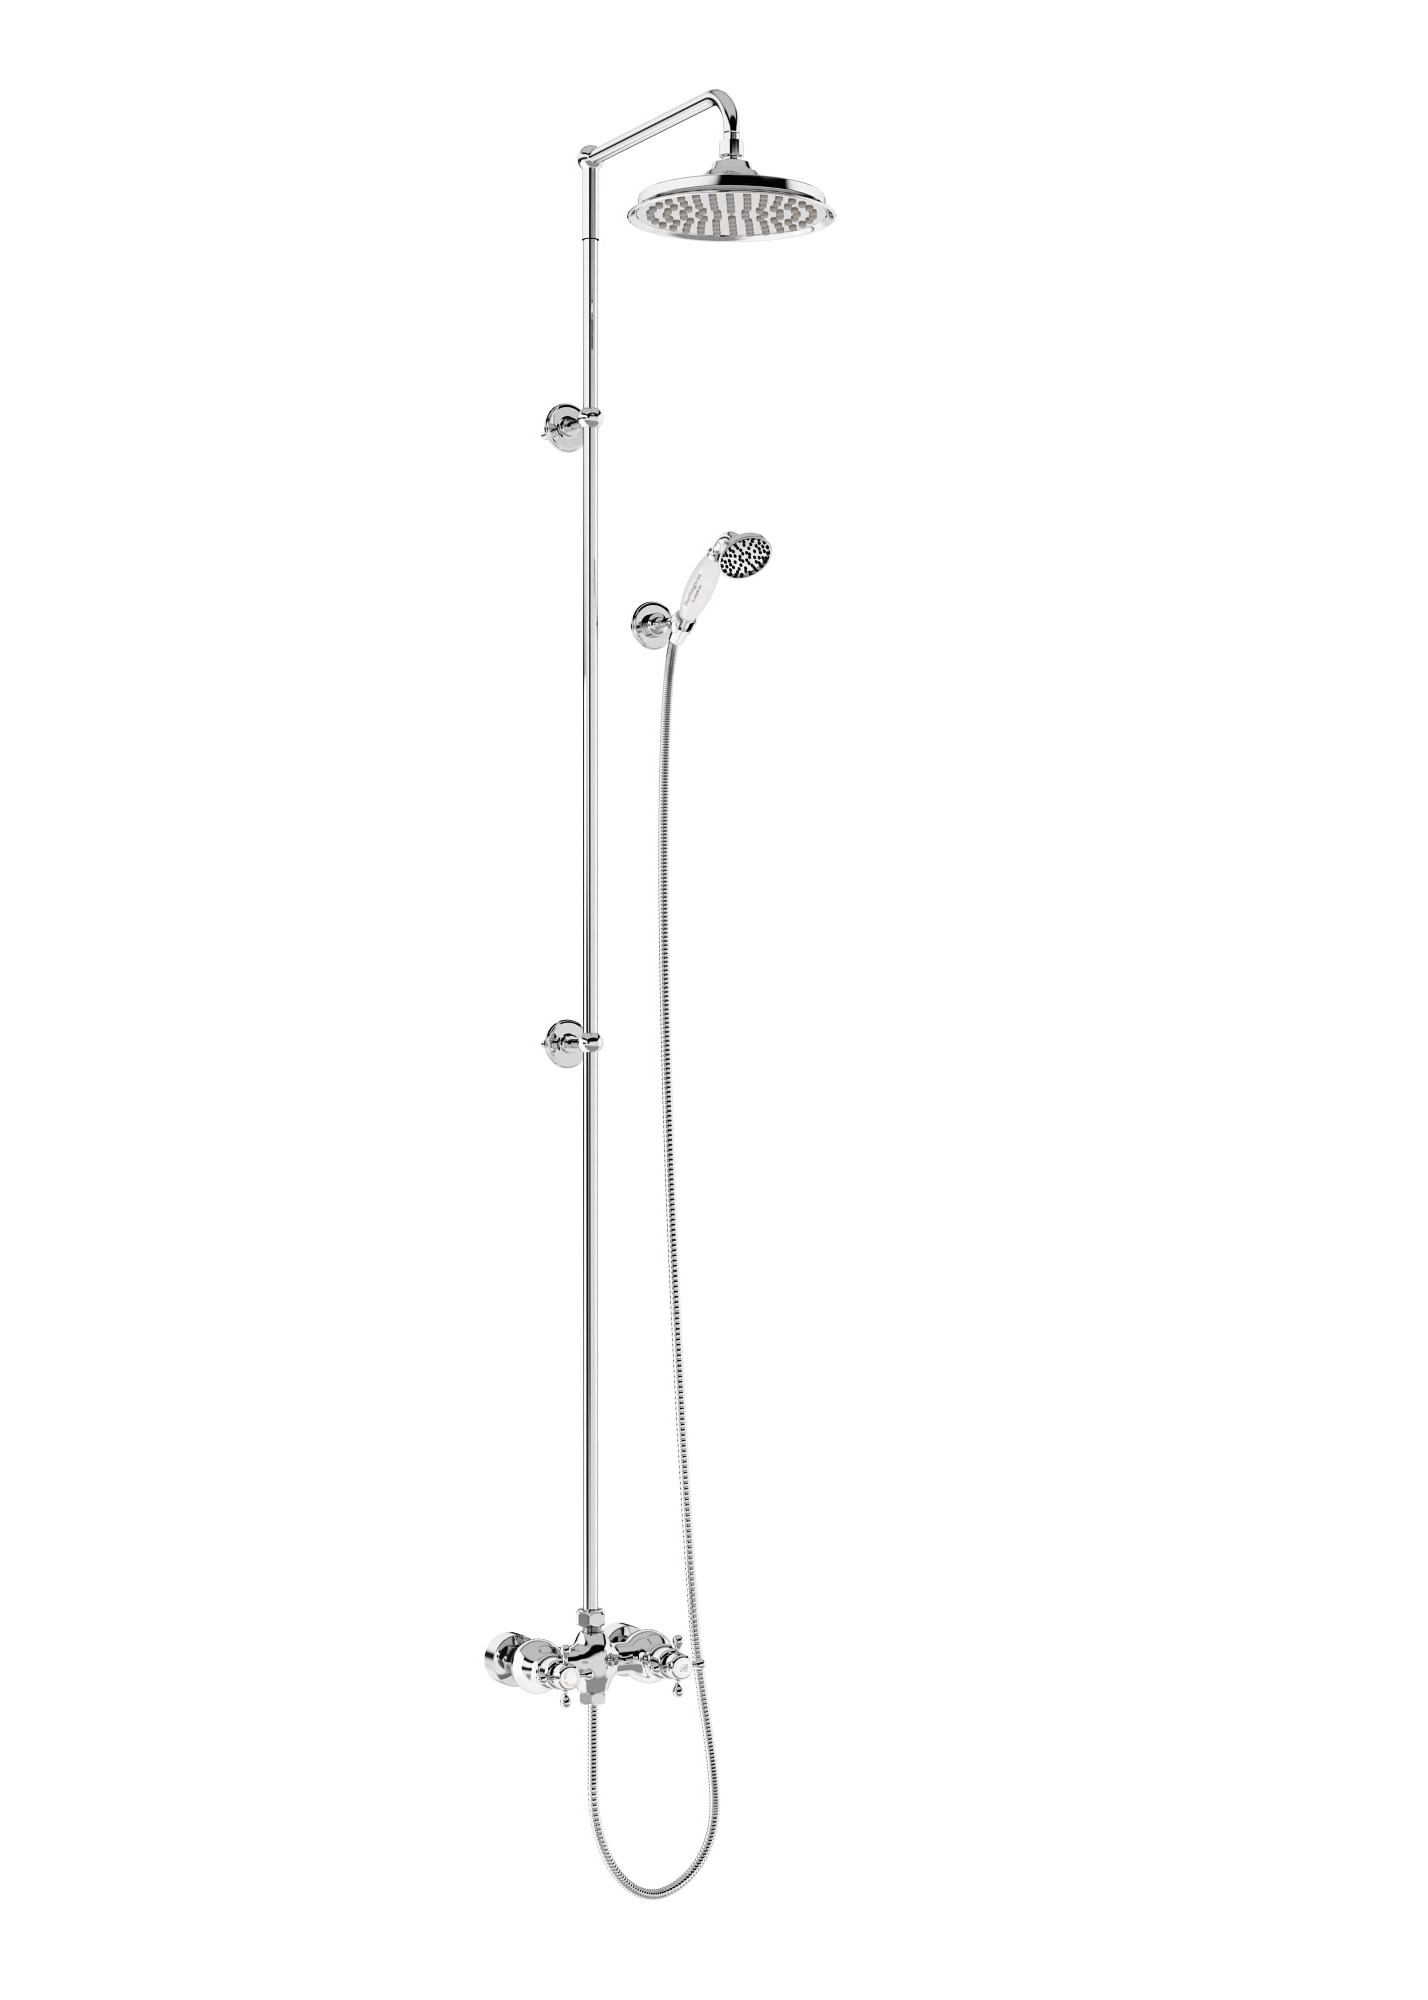 Eden Thermostatic Exposed Shower Bar Valve Single Outlet with Extended Rigid Riser and Swivel Shower Arm with 6 inch rose